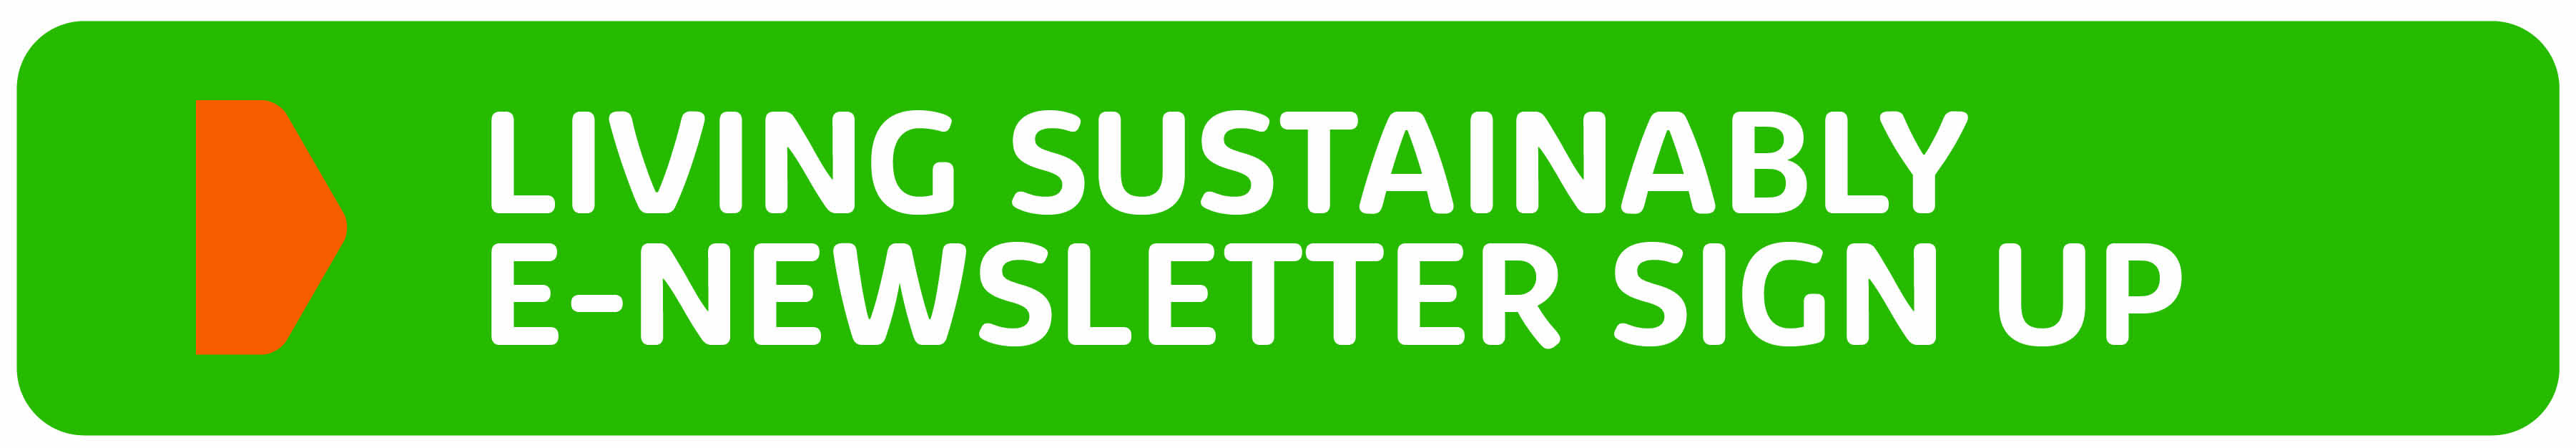 Living-Sustainably-Enewsletter-Sign-up-button